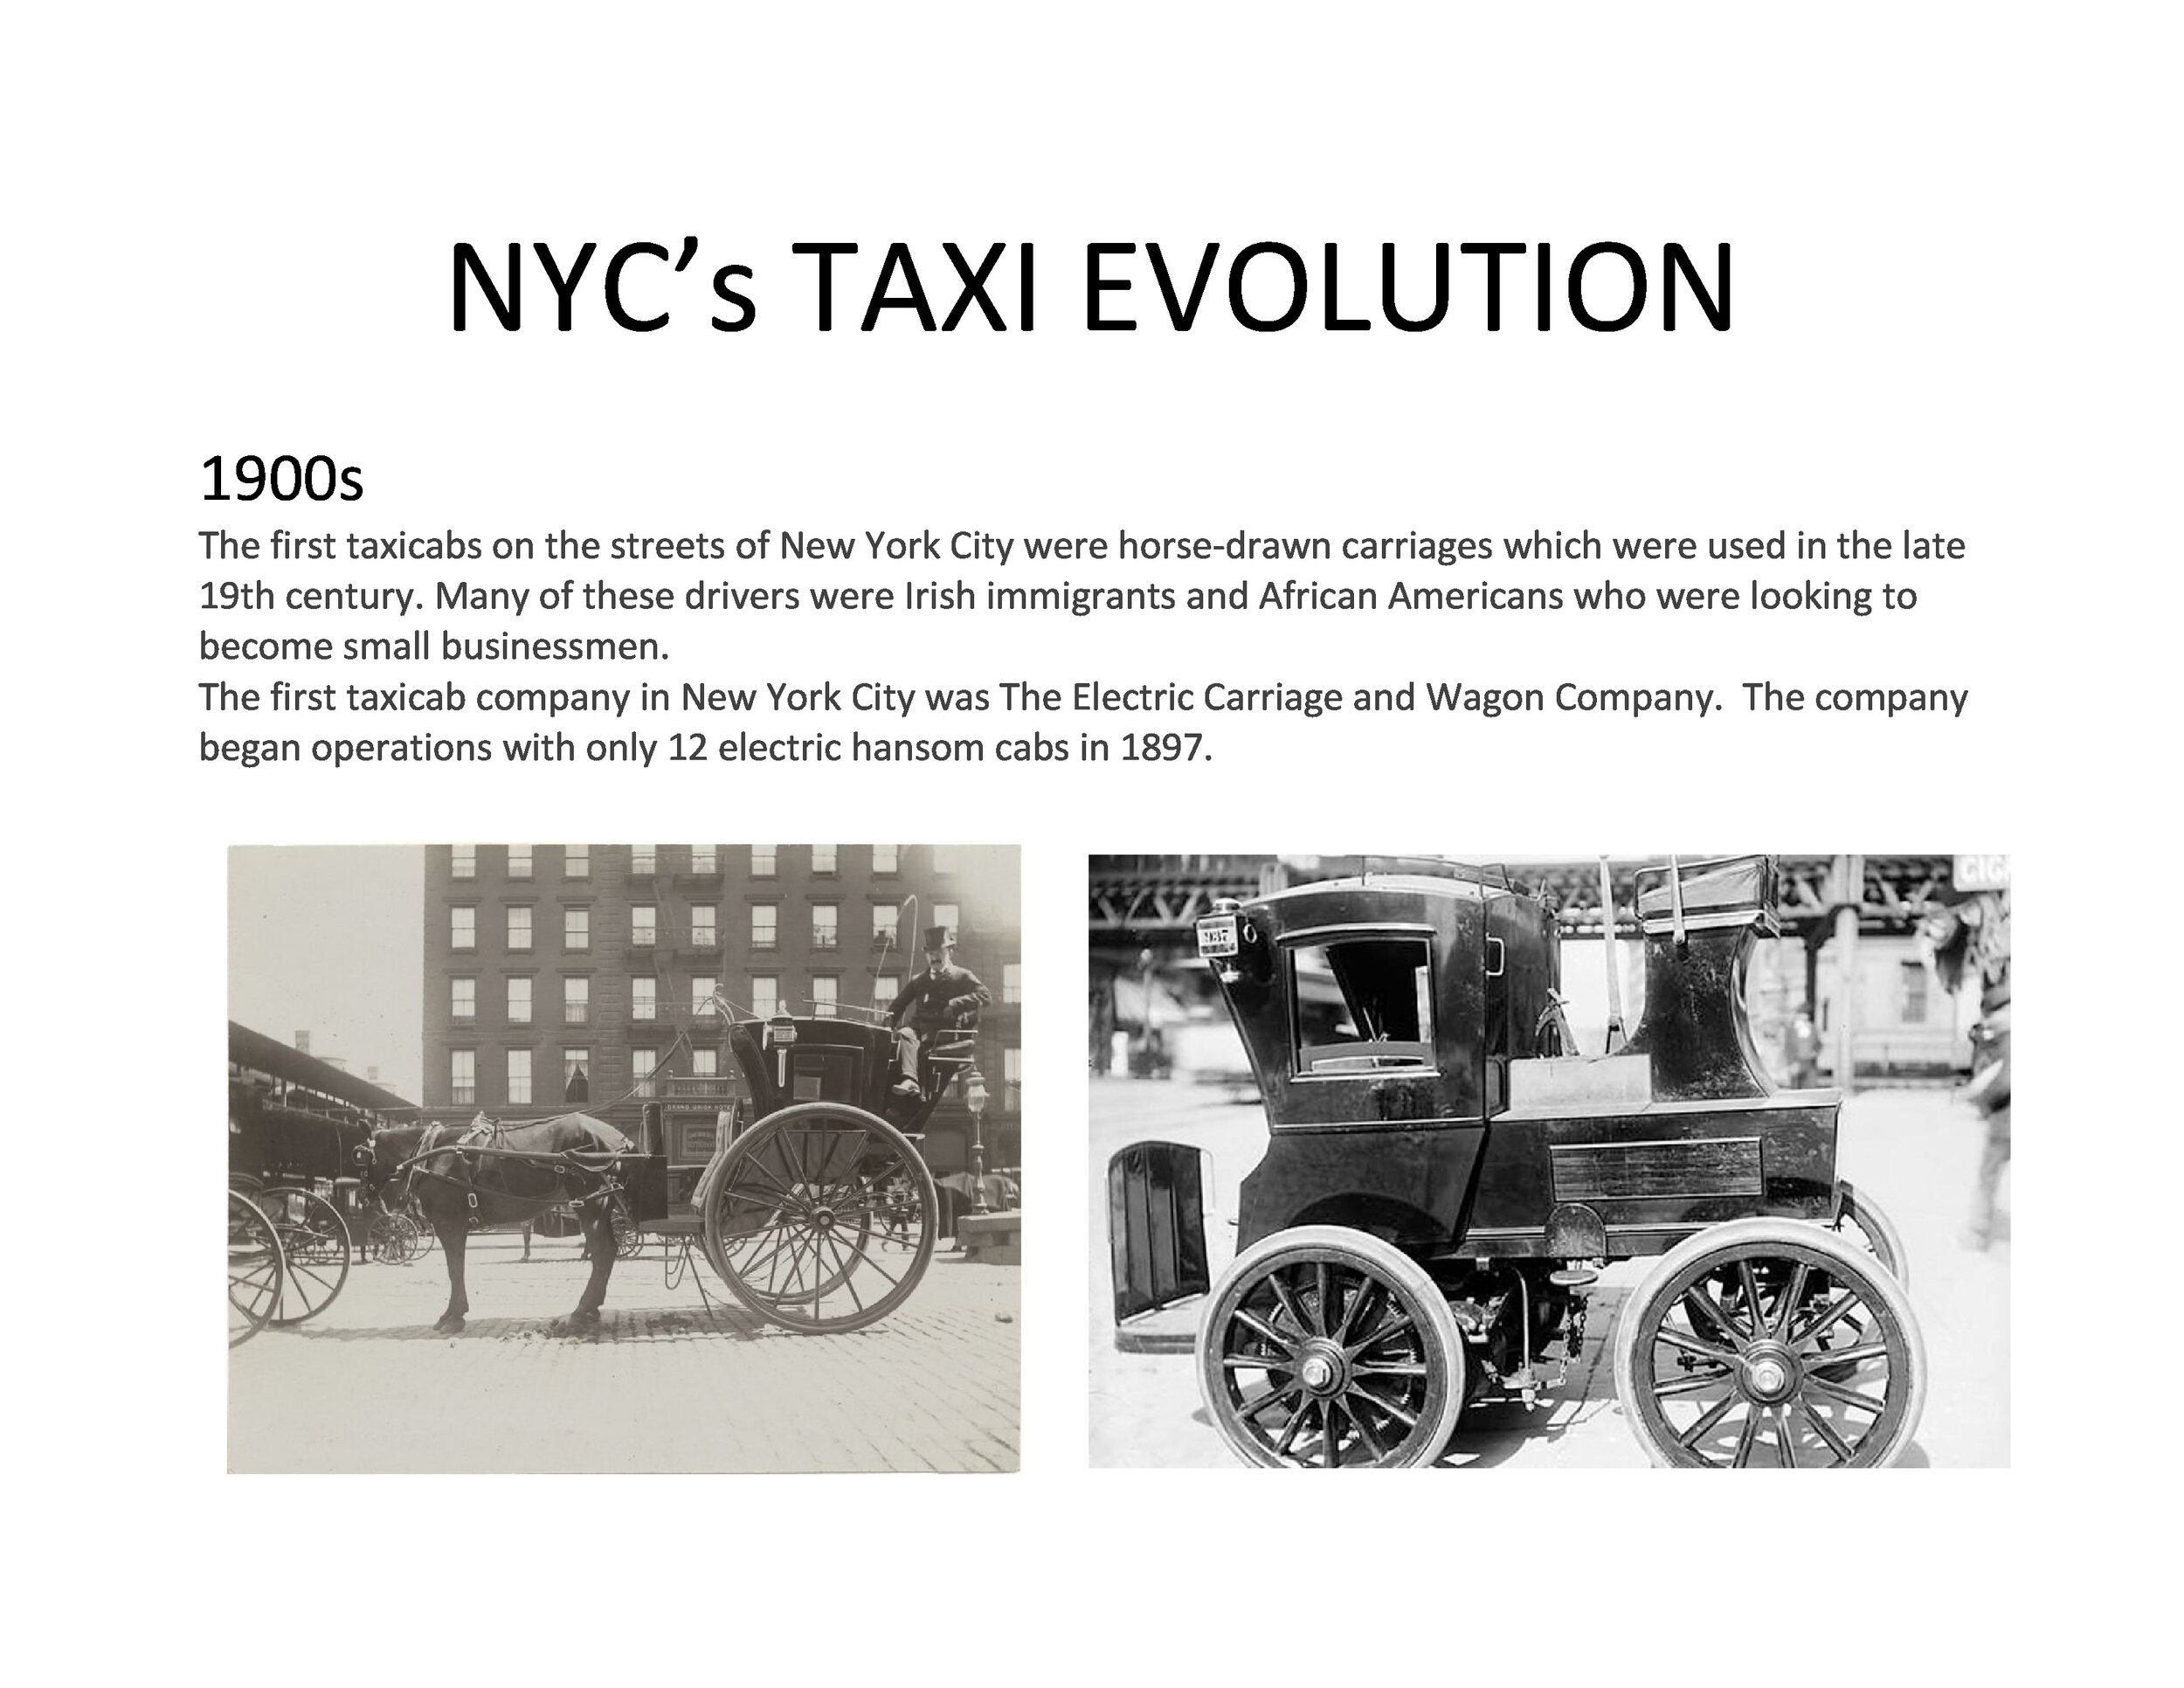 The History of the Taxi